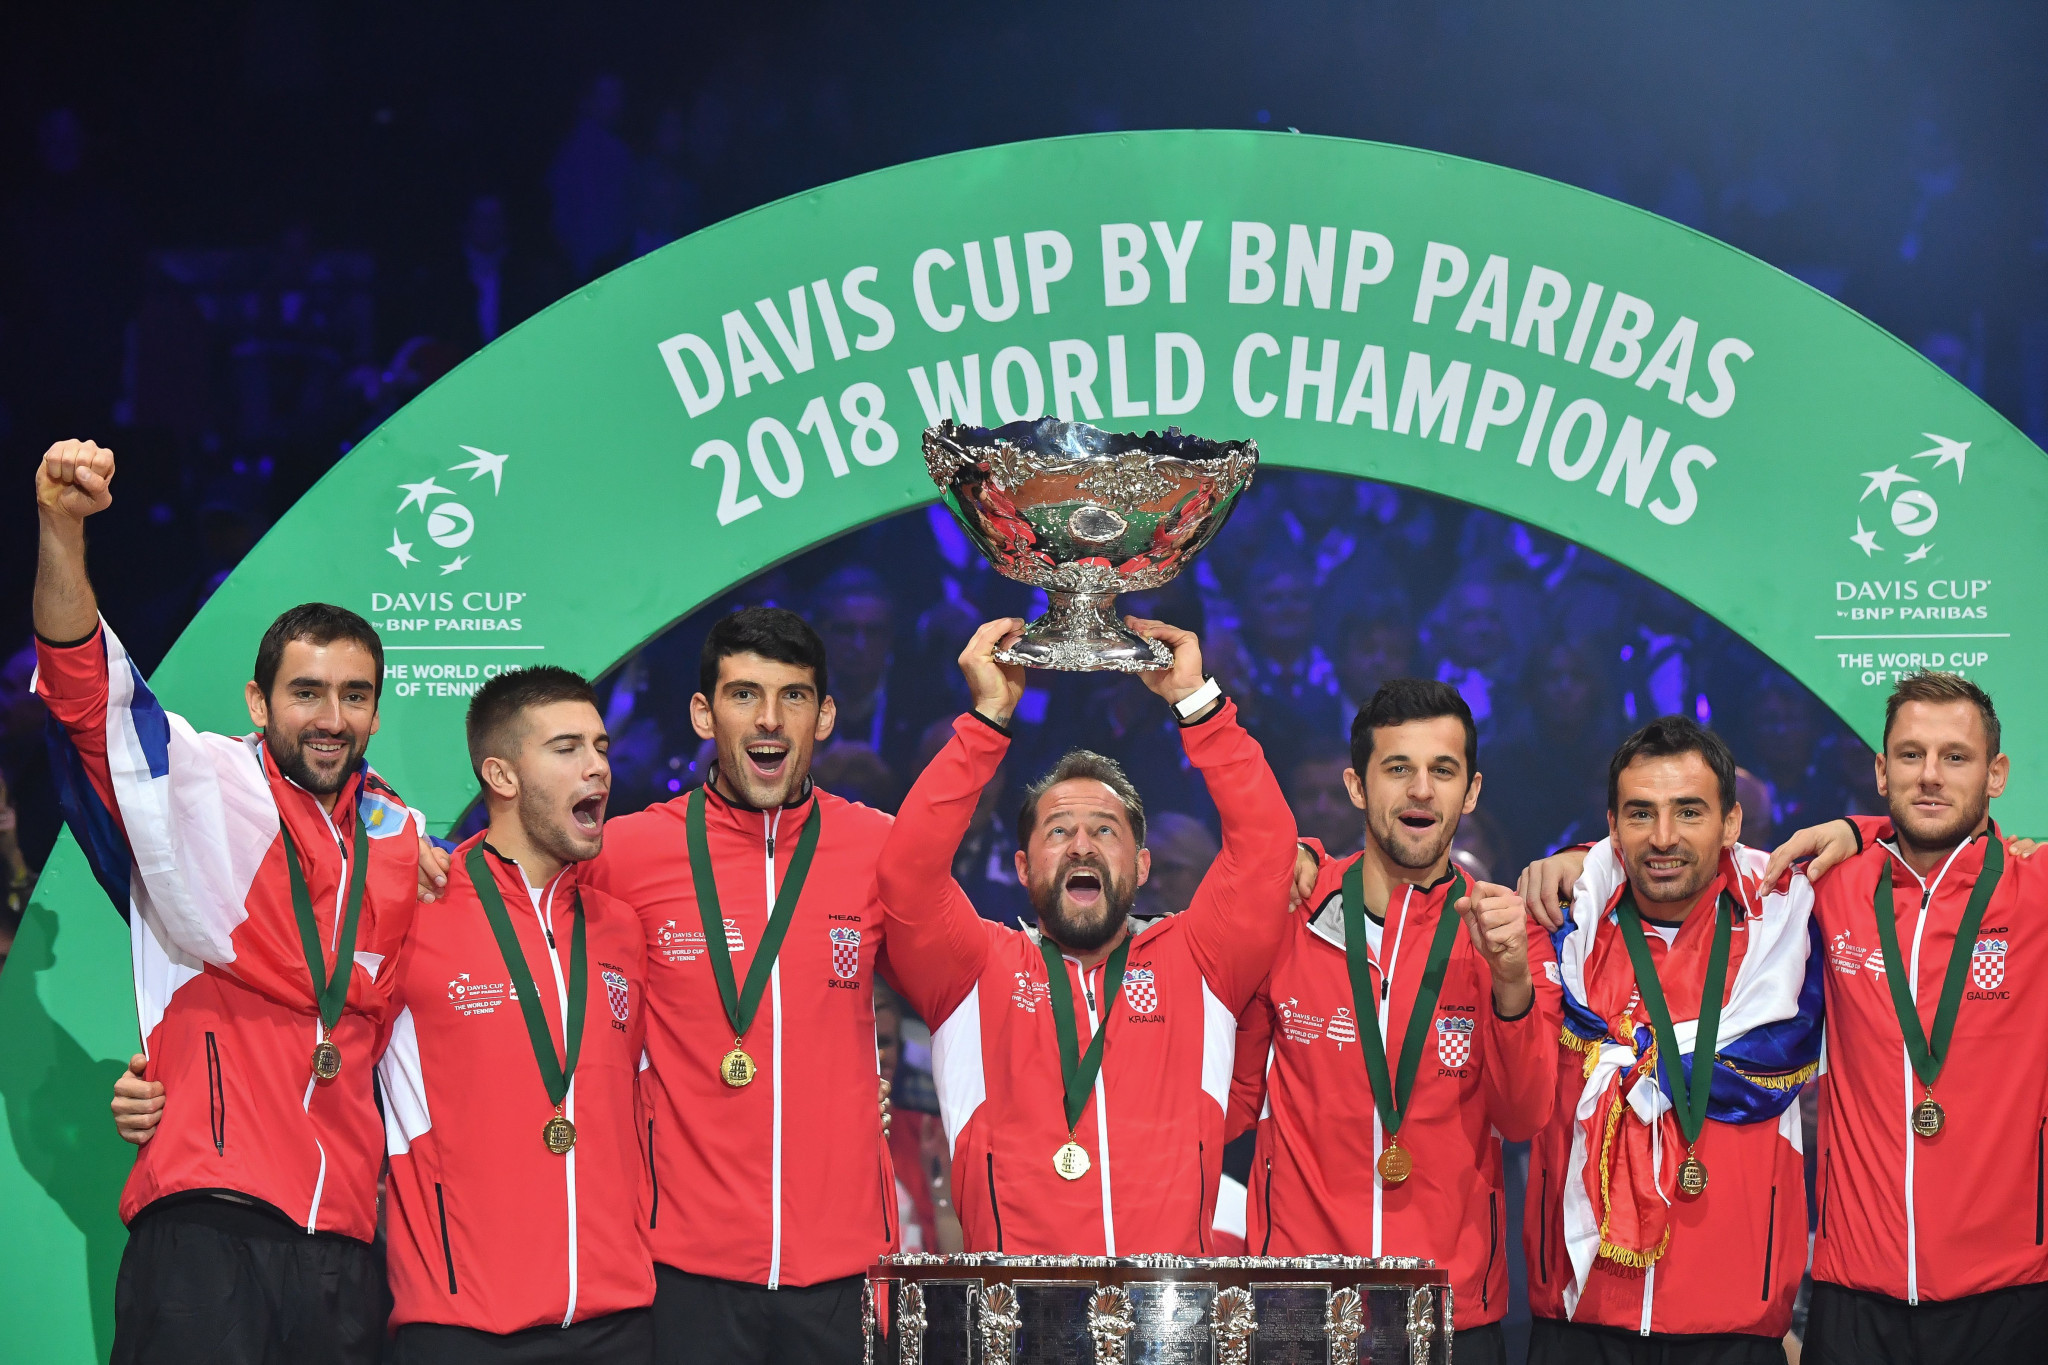 Defending champions Croatia have been seeded second for the 2019 Davis Cup Finals ©Getty Images